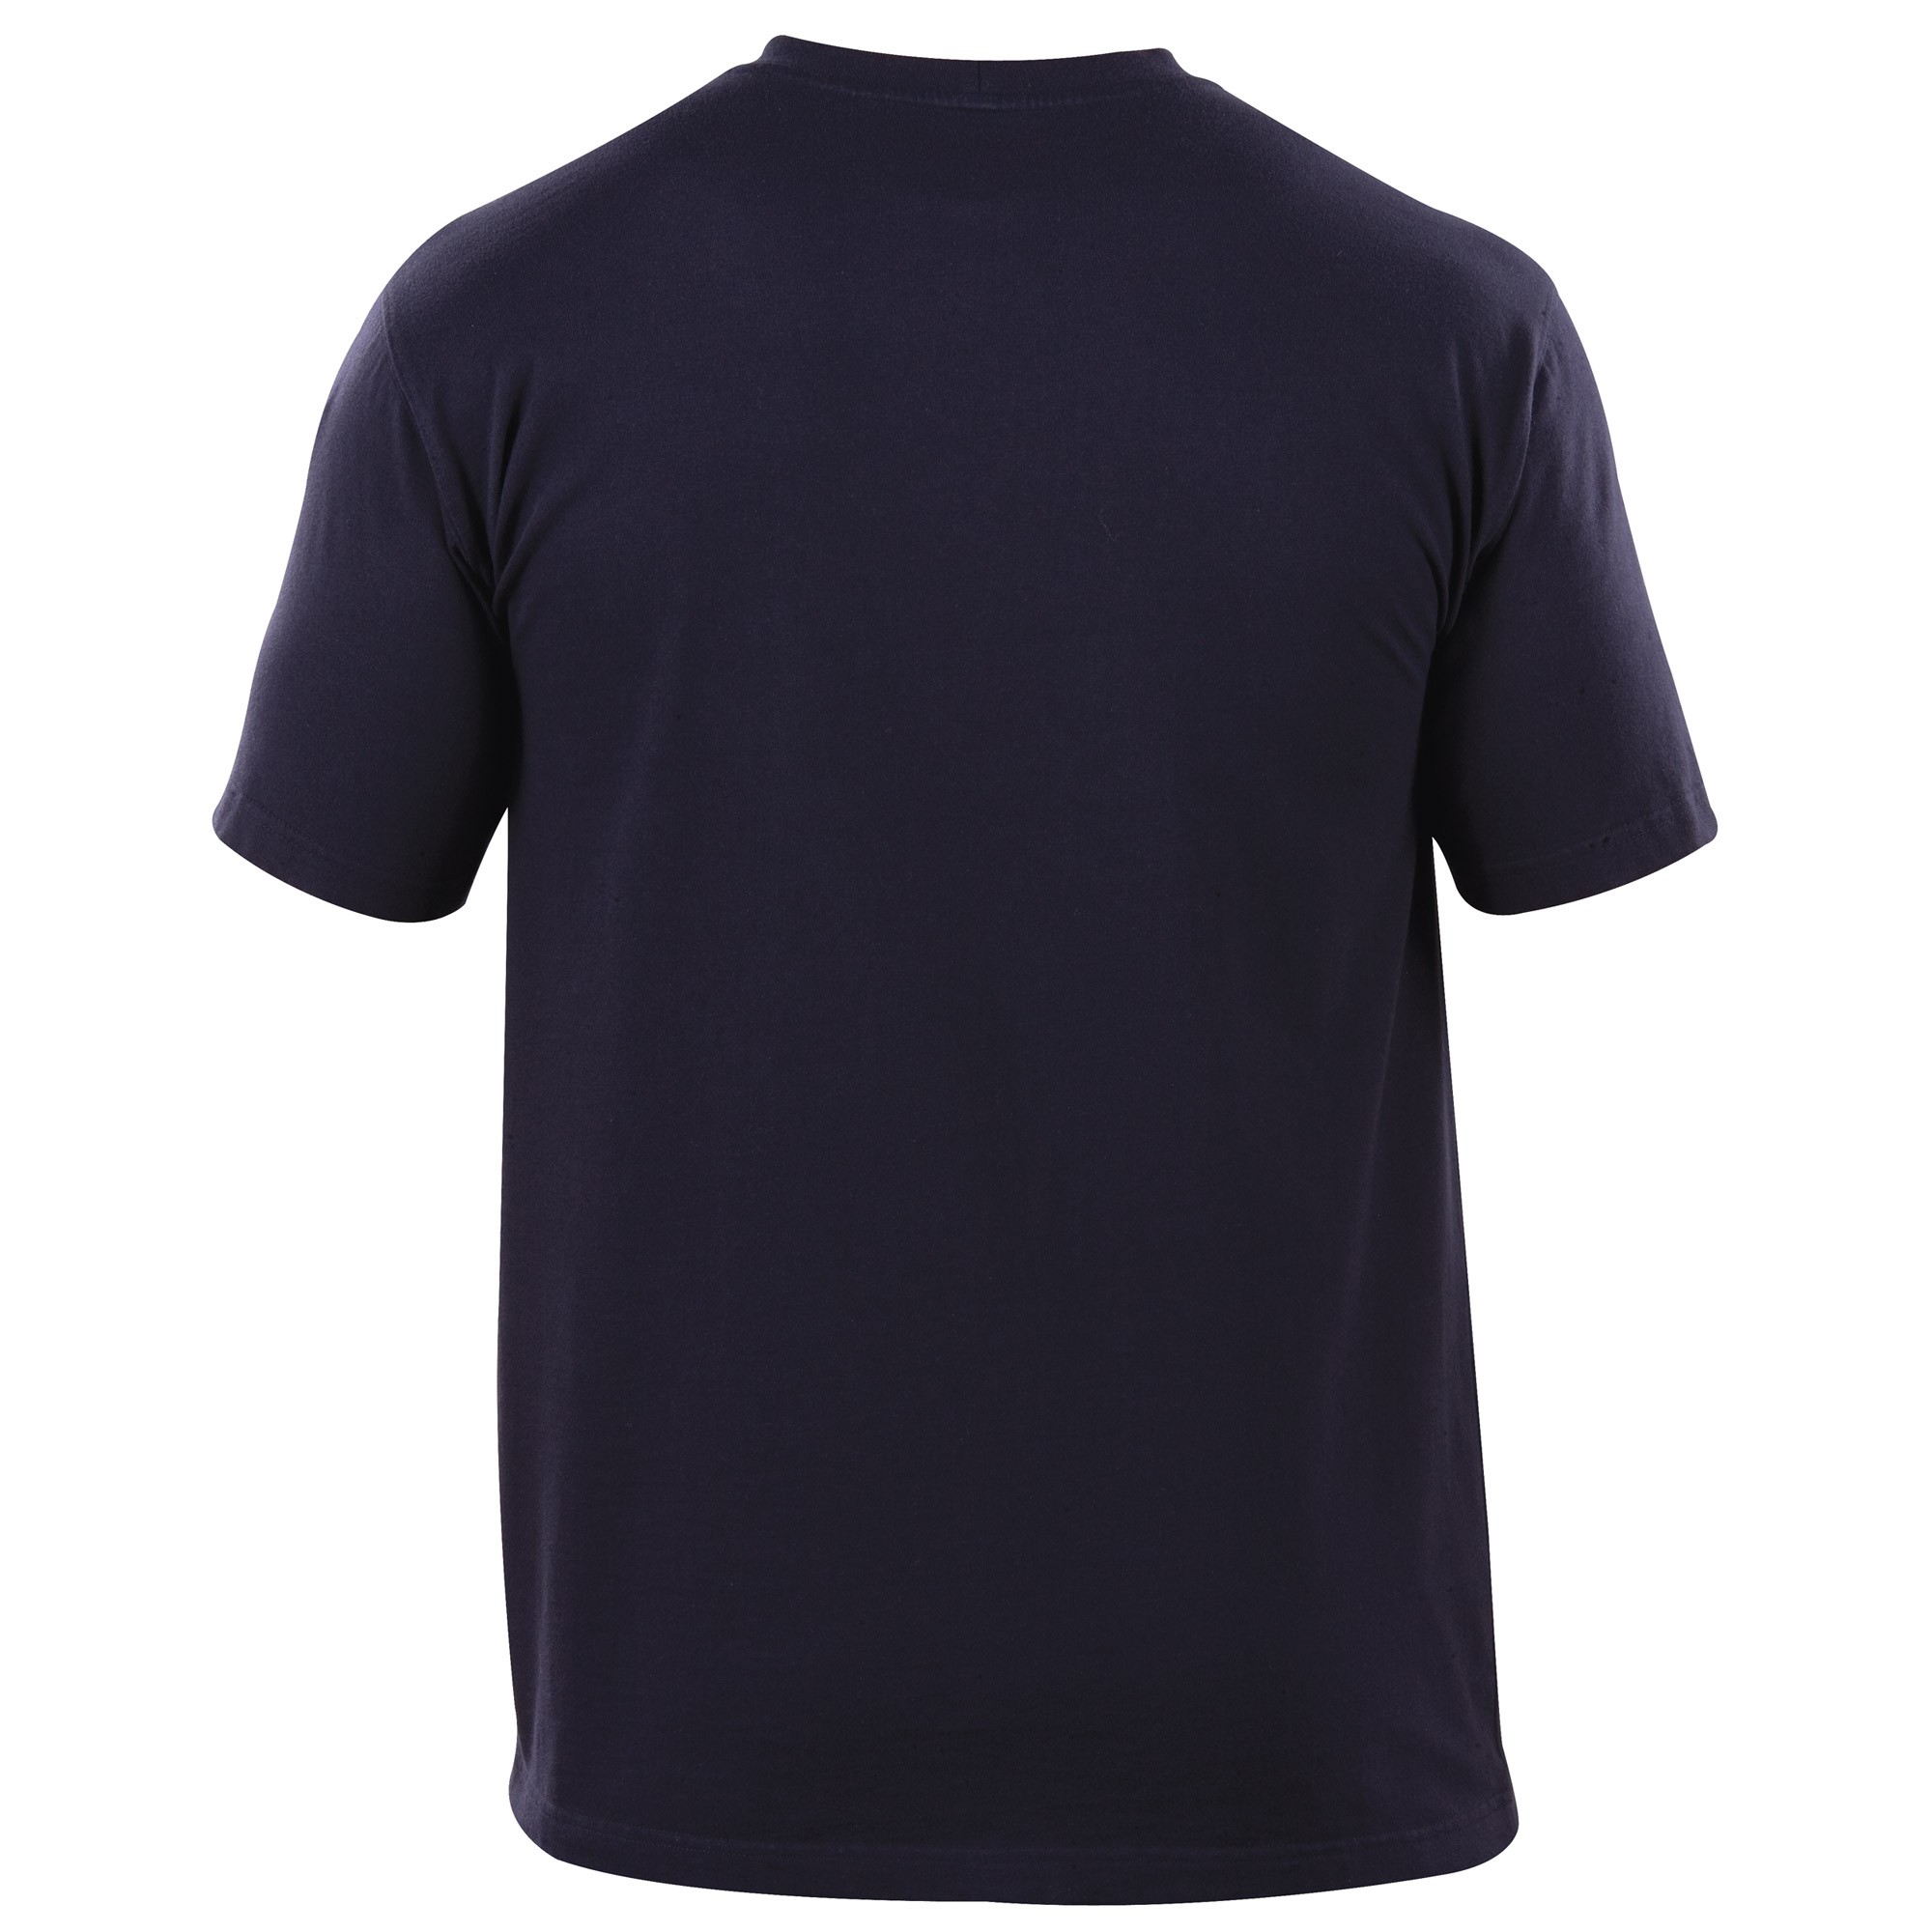 5.11 Tactical Professional Short Sleeve T Shirt | Official 5.11 Site